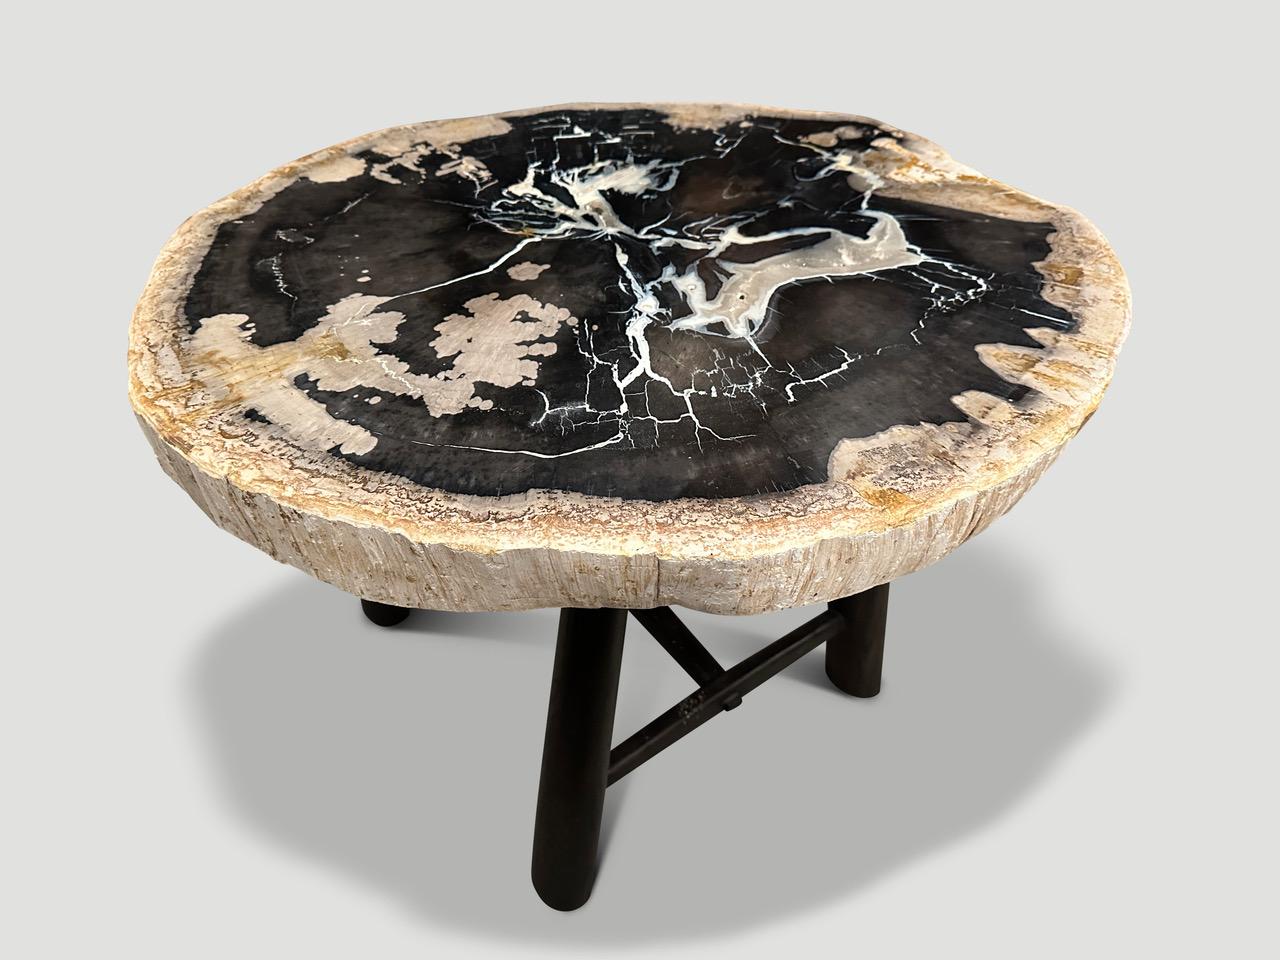 Impressive two and a half inch slab top with the most beautiful contrasting color tones and featuring natural crystals. Resting on a custom espresso teak wood mid century style base. It’s fascinating how Mother Nature produces these stunning 40